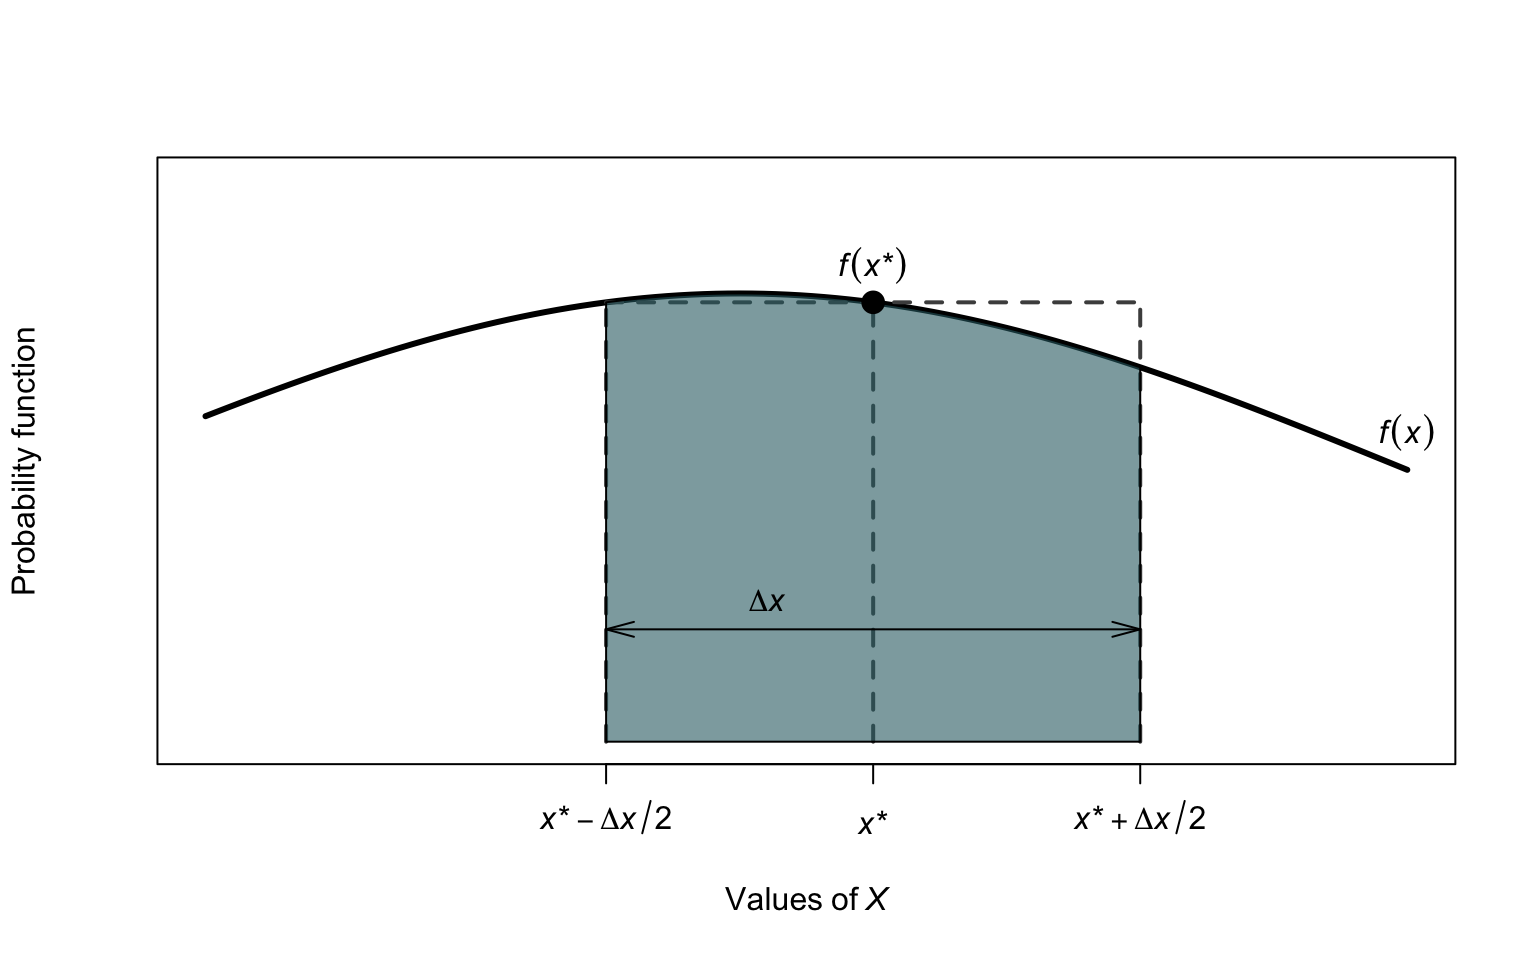 Finding probabilities for a continuous random variable $X$